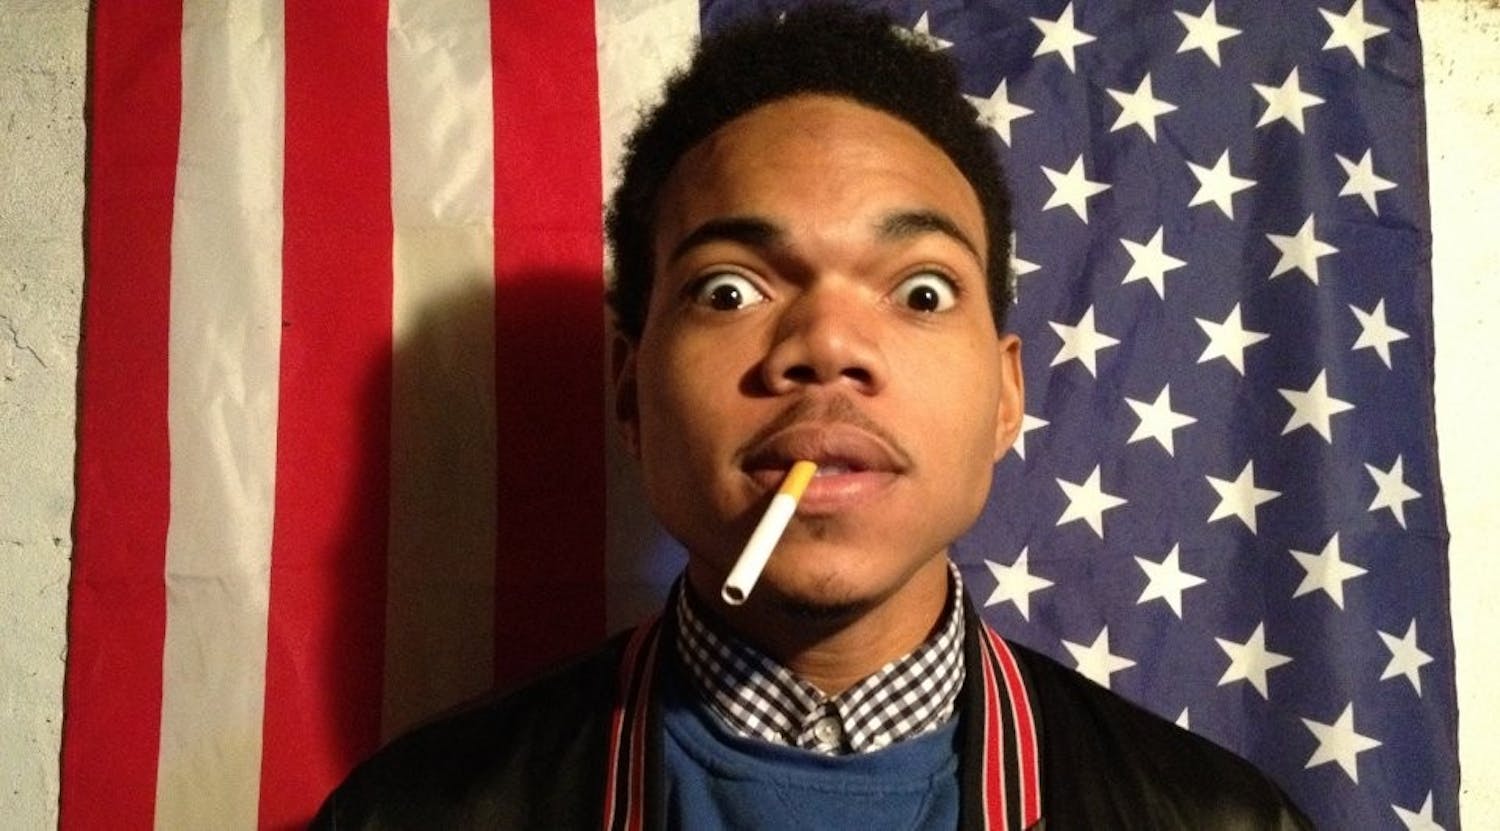 Chance the Rapper. Photo taken from MTV.com.